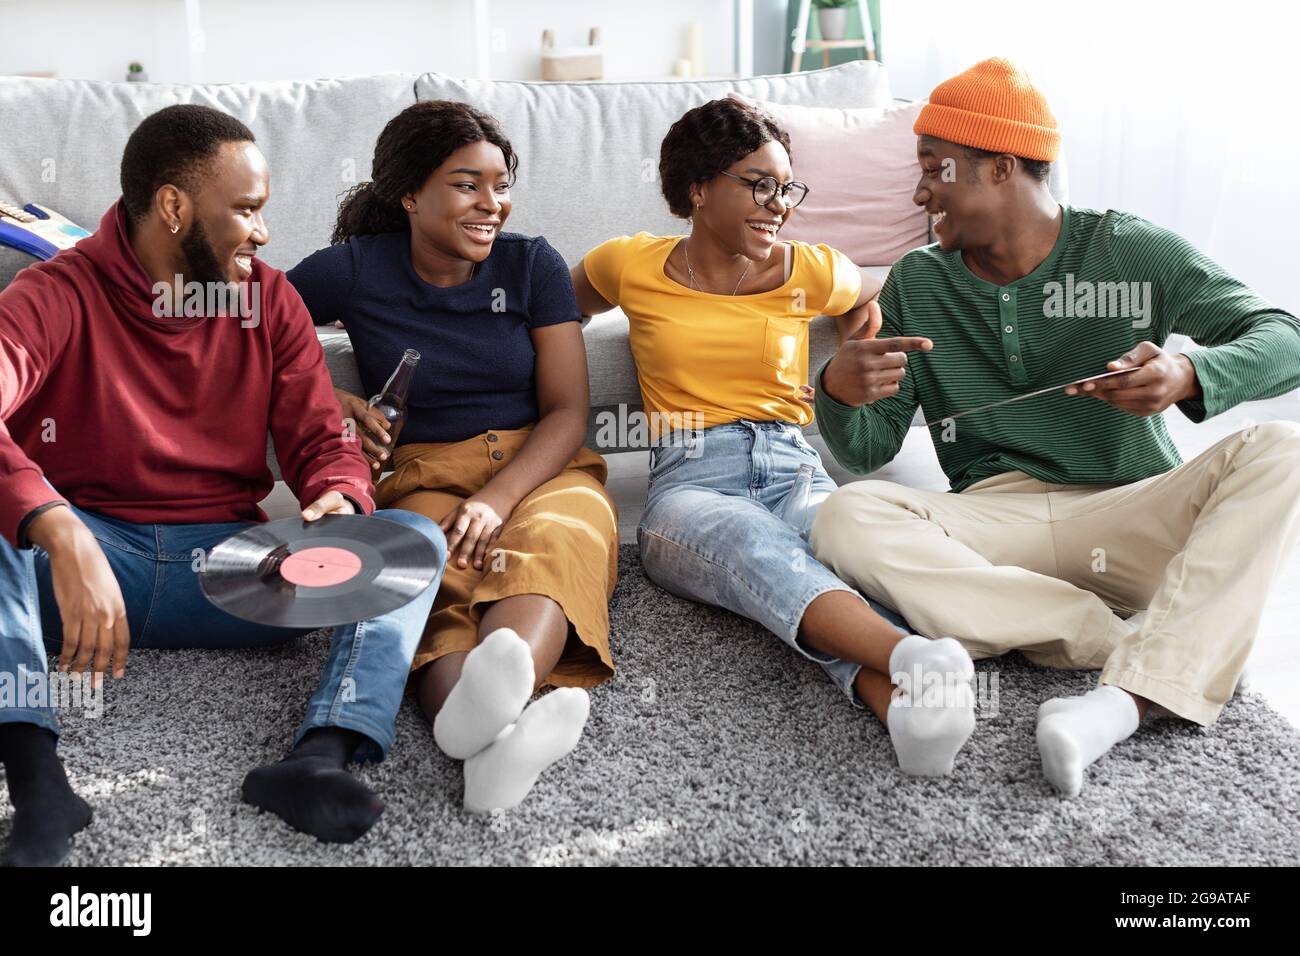 Charismatic black guy showing his friends vynil records Stock Photo